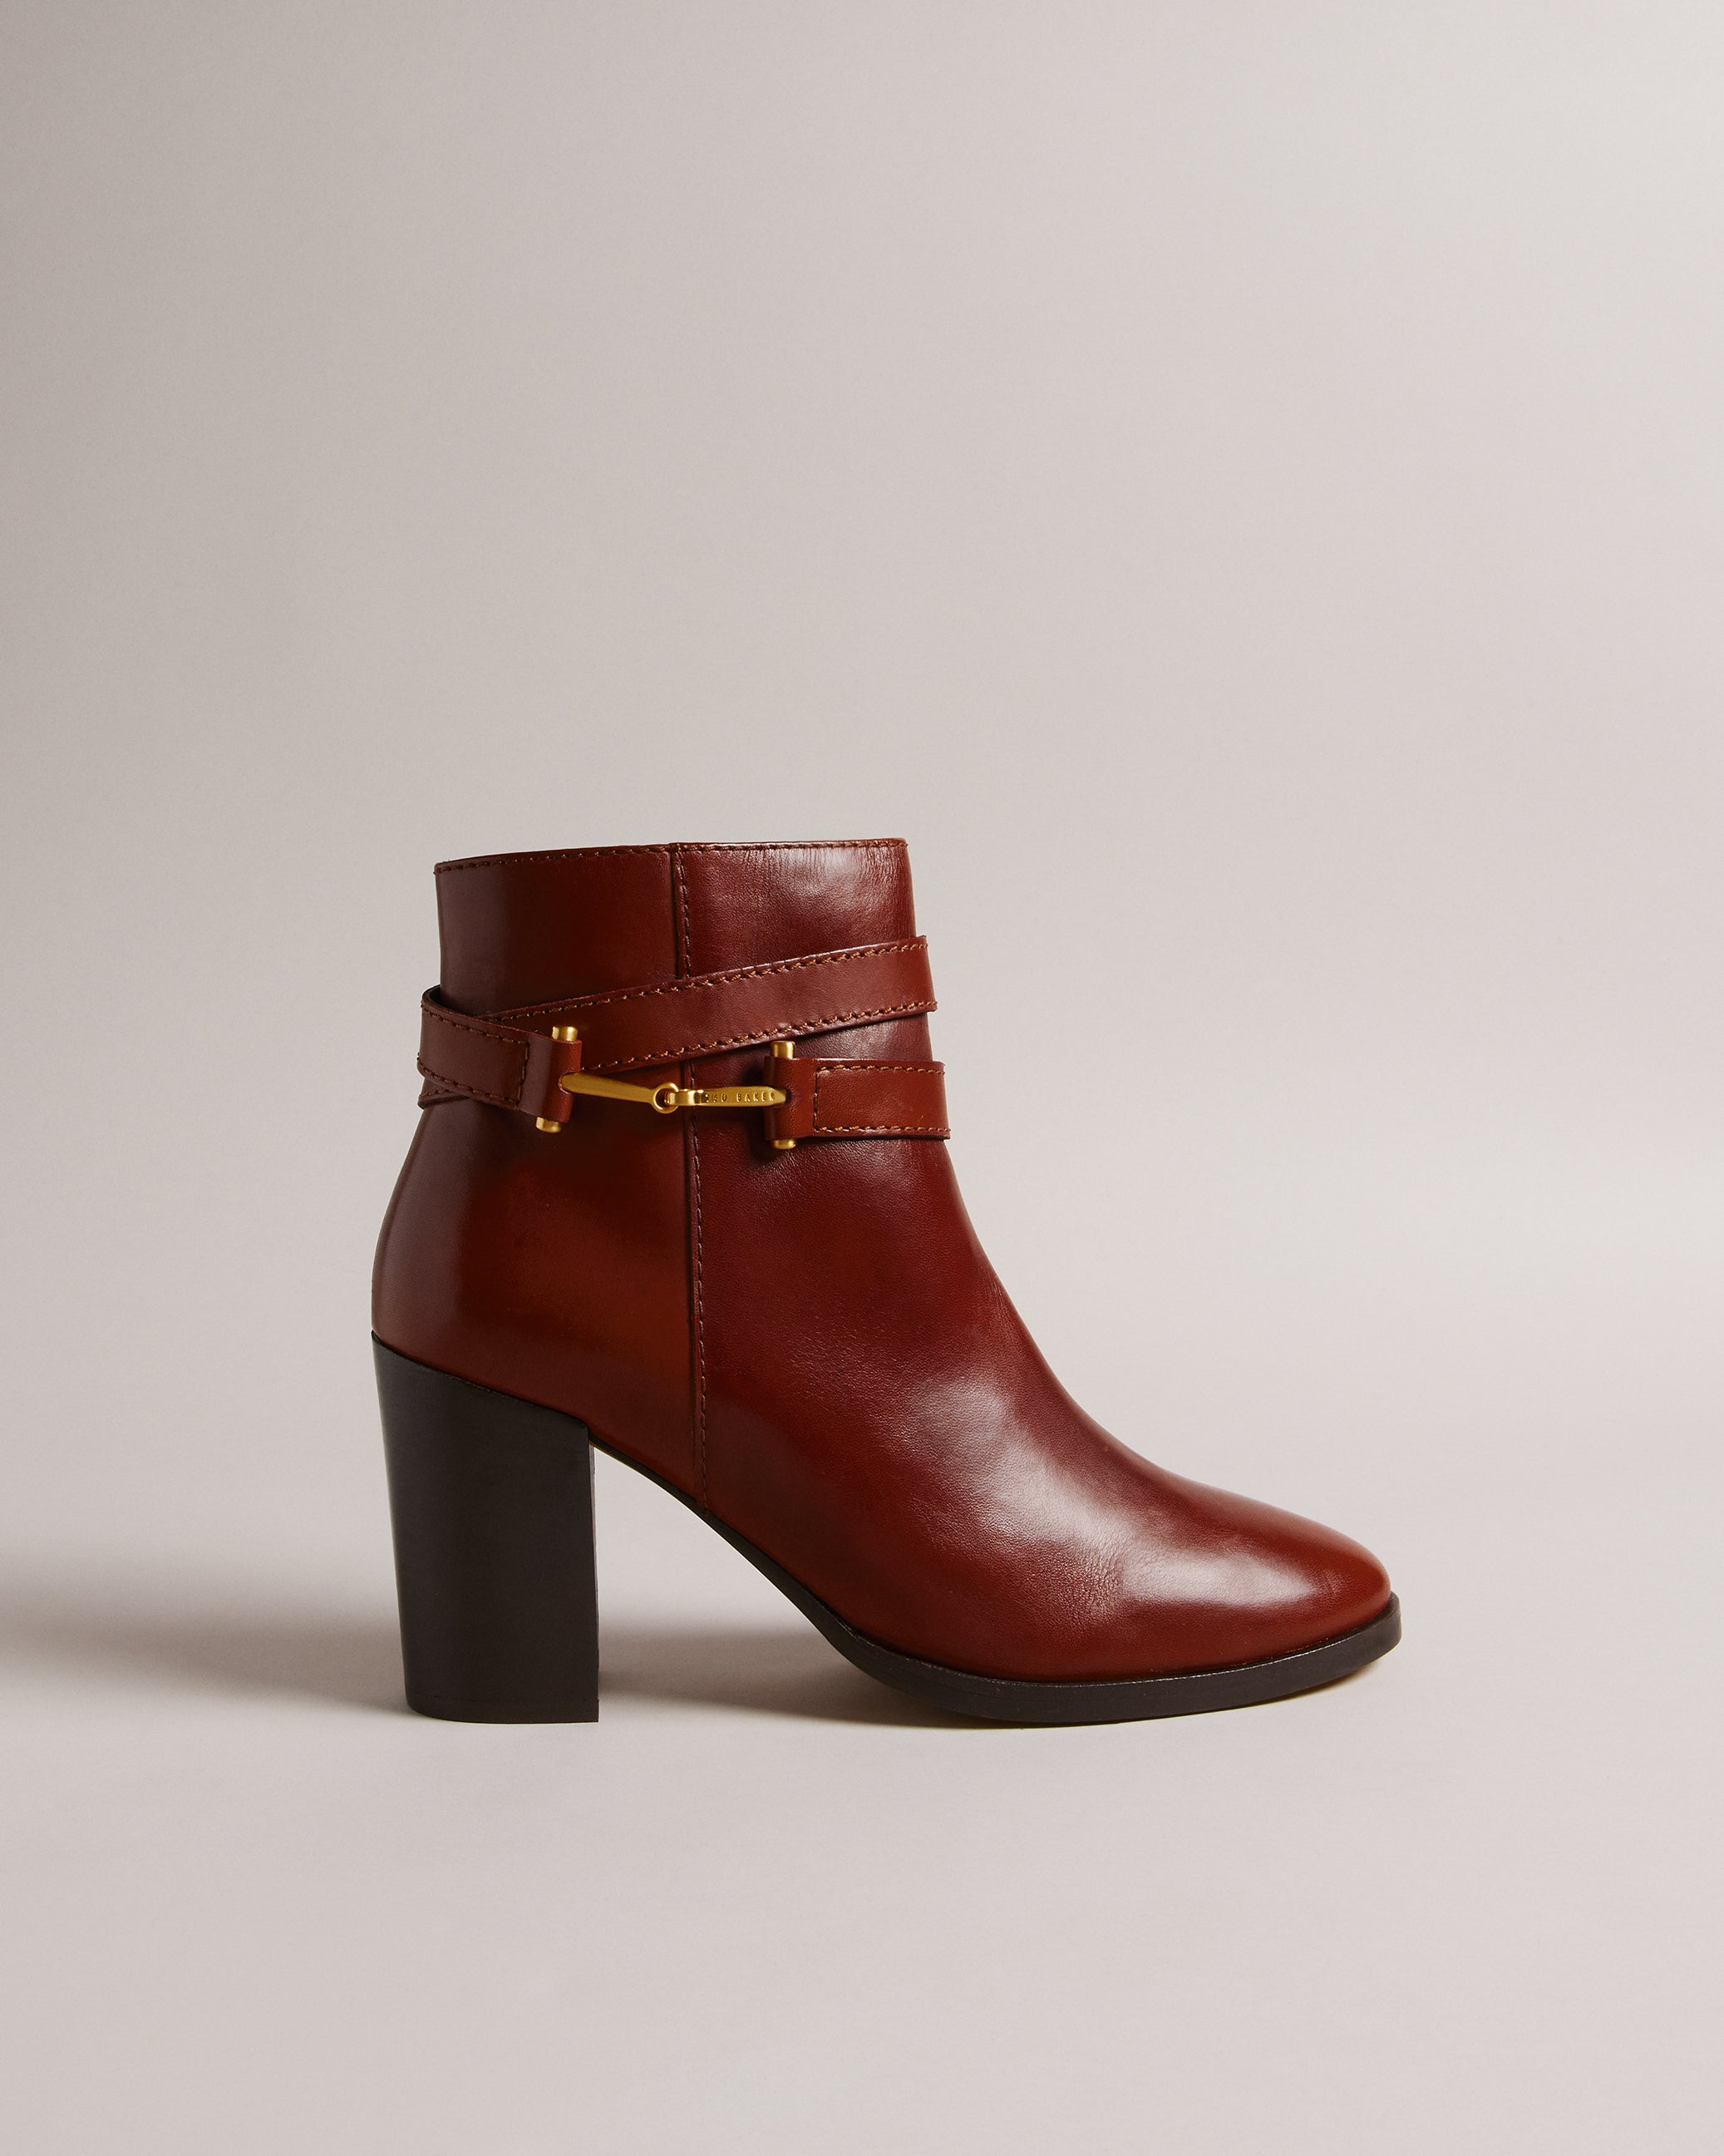 ANISEA - T Hinge Leather 85mm Ankle Boot